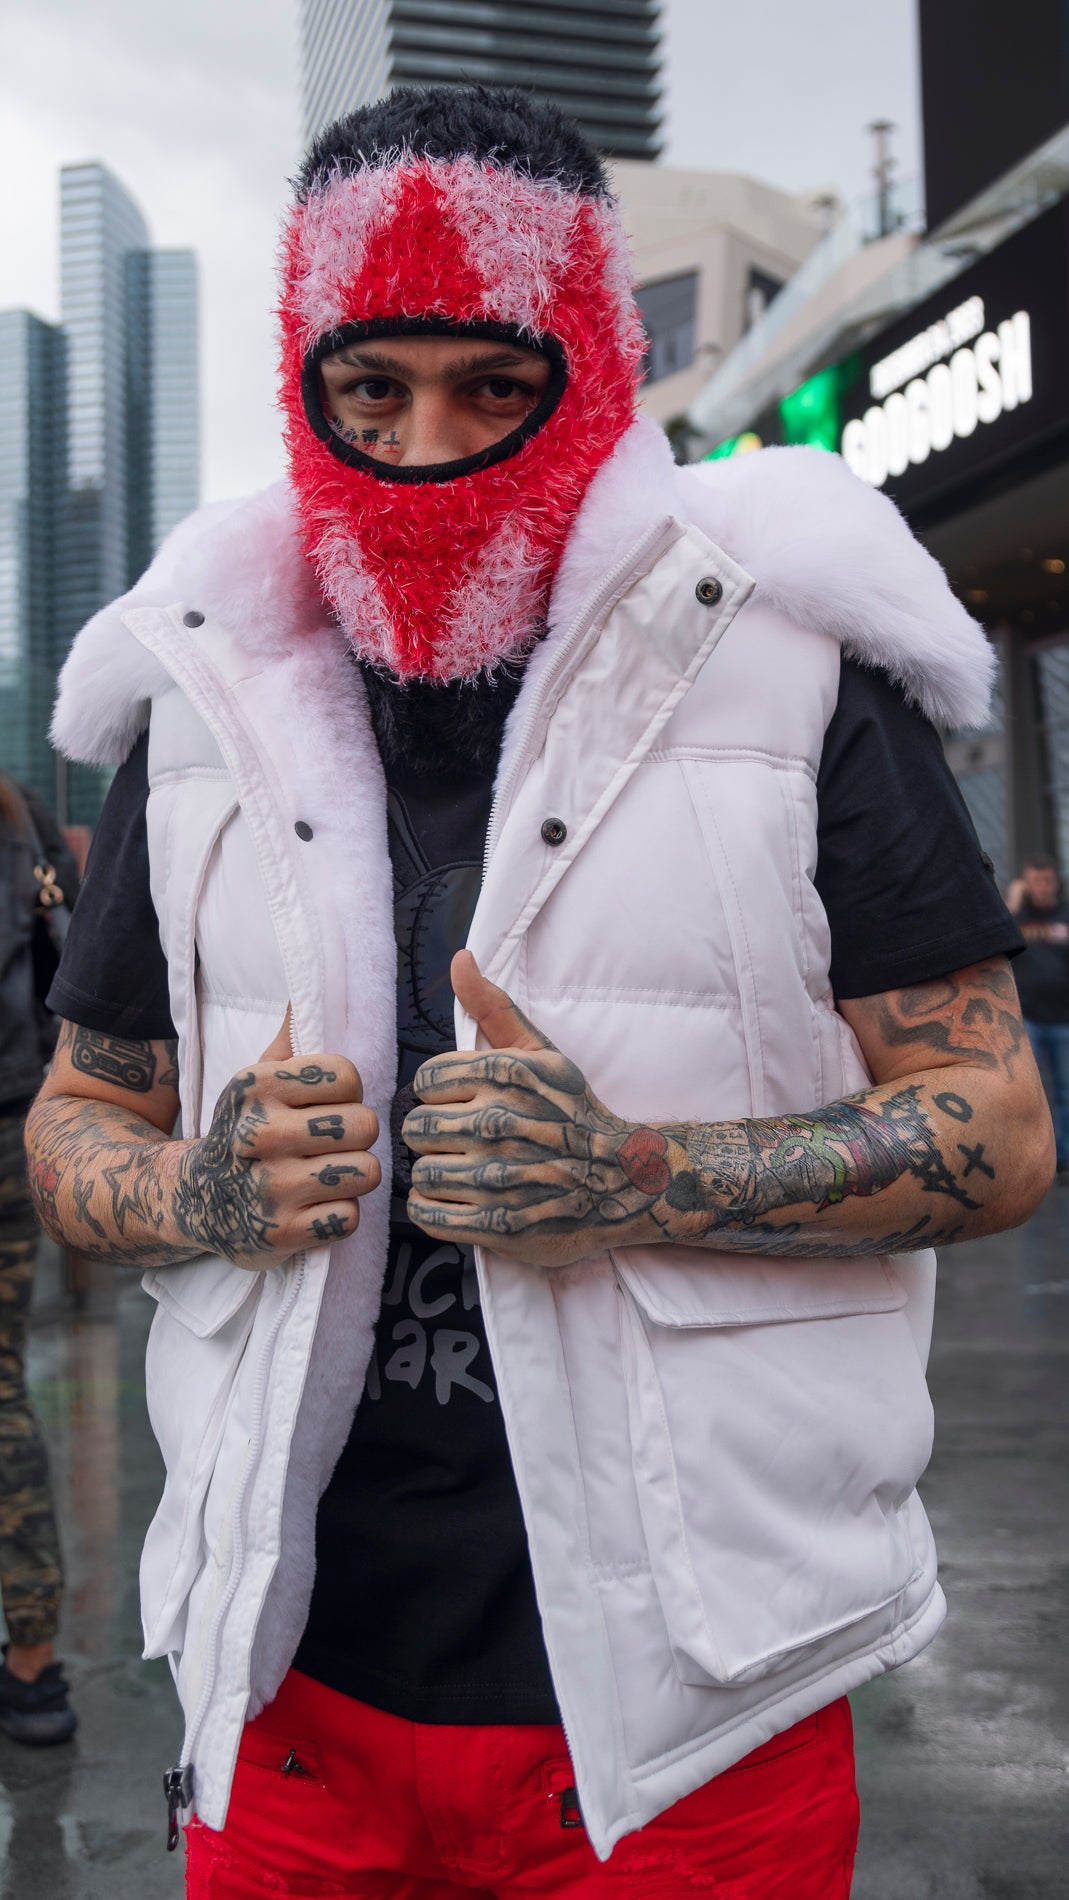 Prynce Ink wearing a Faux fur-lined hooded jacket made of a water-resistant polyester shell featuring a removable hood with a removable faux fox fur trim. The hood and front of the jacket are lined with faux rabbit fur for superior warmth. The jacket has JC branded zippers throughout, dual pockets at the sides with button openings, and a full zipper front opening. Faux suede taping adorns the front zipper.